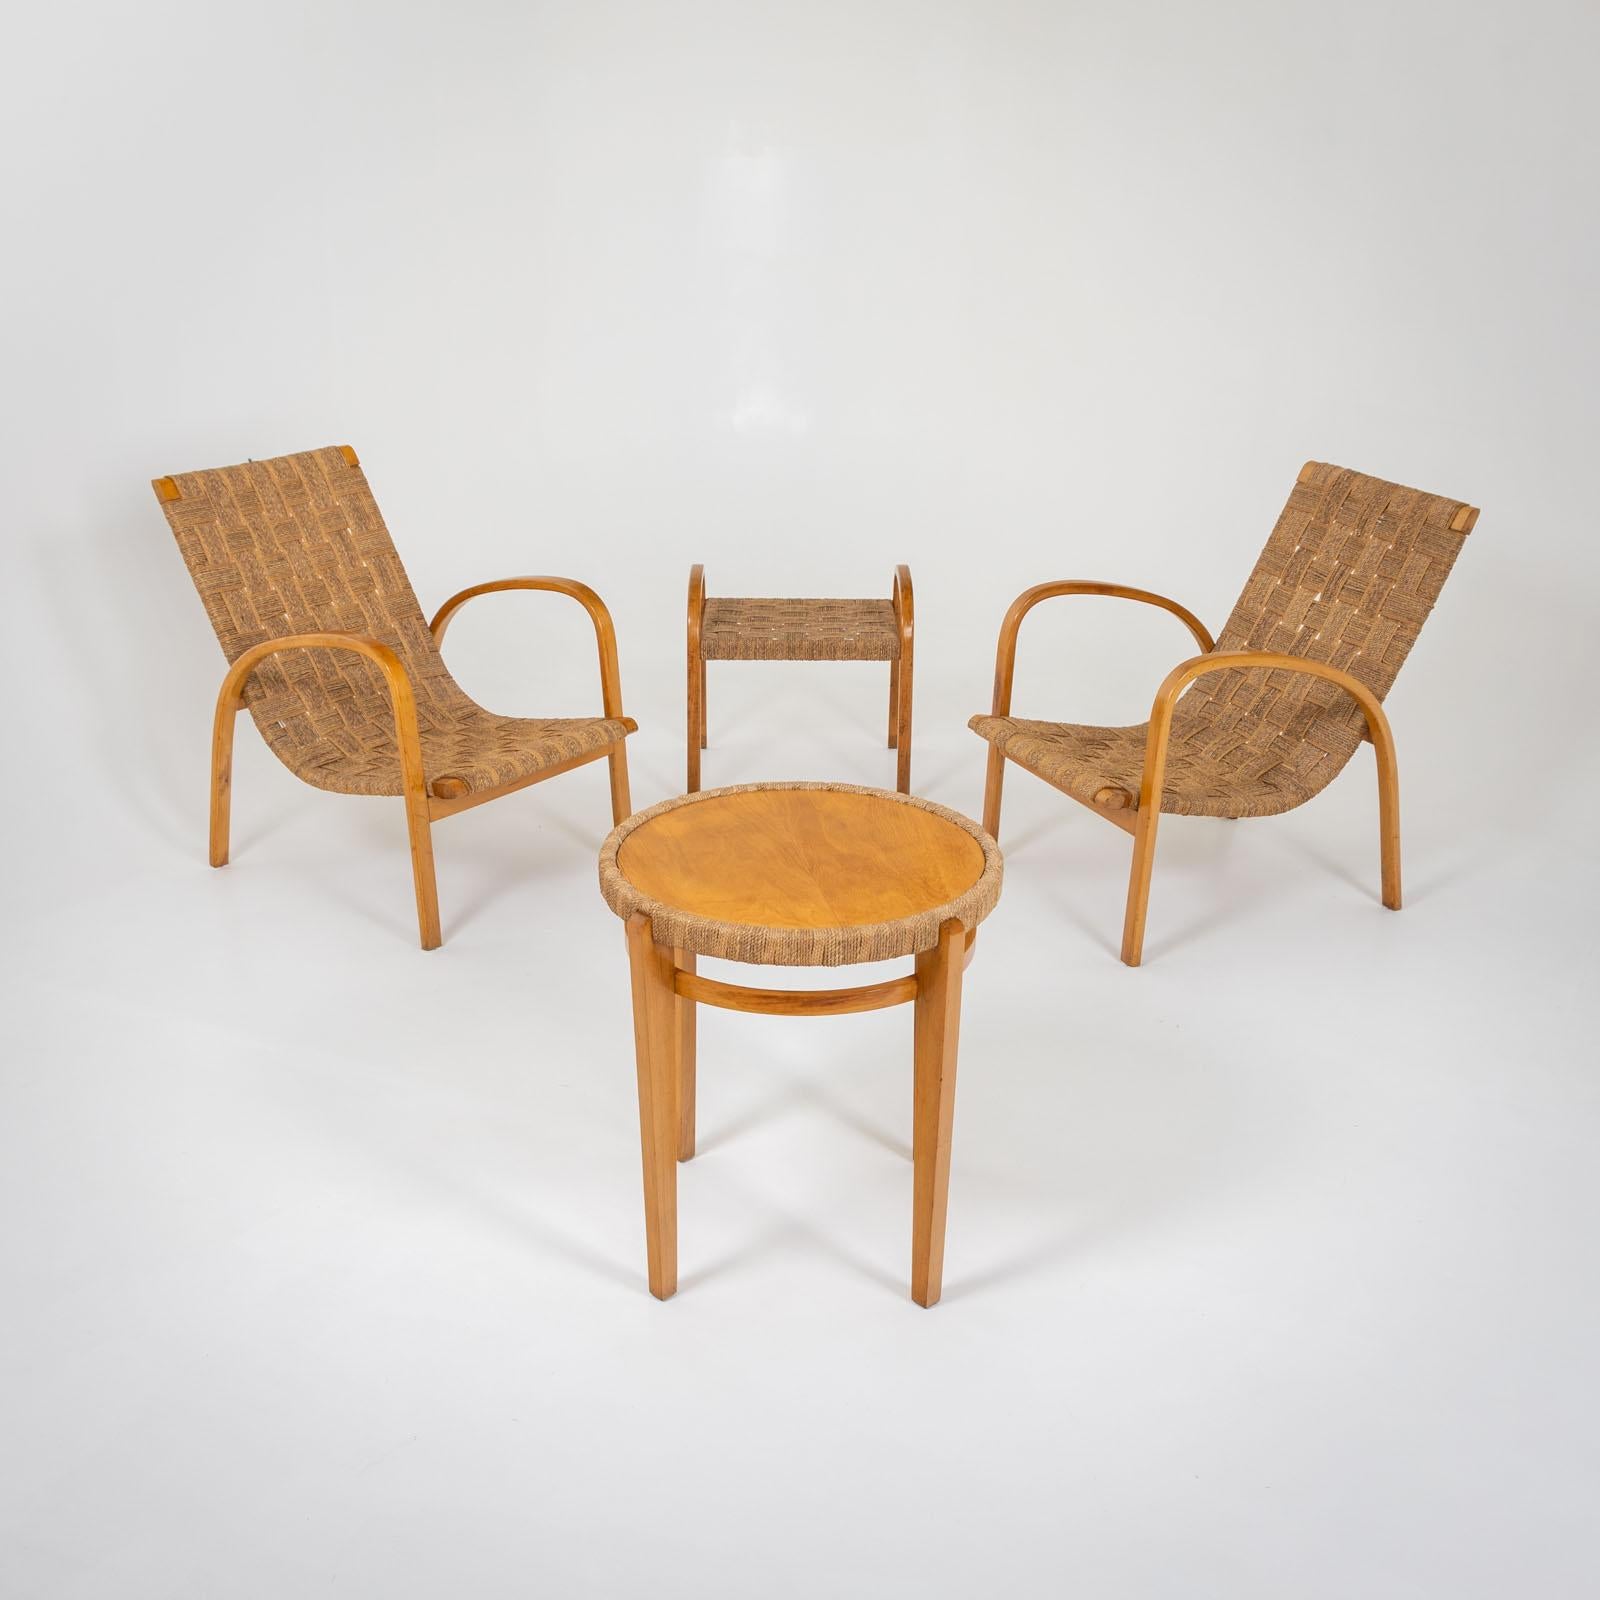 Seating group consisting of two armchairs, a stool and a side table. The group is made of bentwood and covered with hemp ropes. Unrestored original condition.

Dimensions:
Armchairs: 82 x 60 x 80 x 29 cm
Stool: 51 x 51.5 x 43 x 40 cm
Table: 61 x Ø60